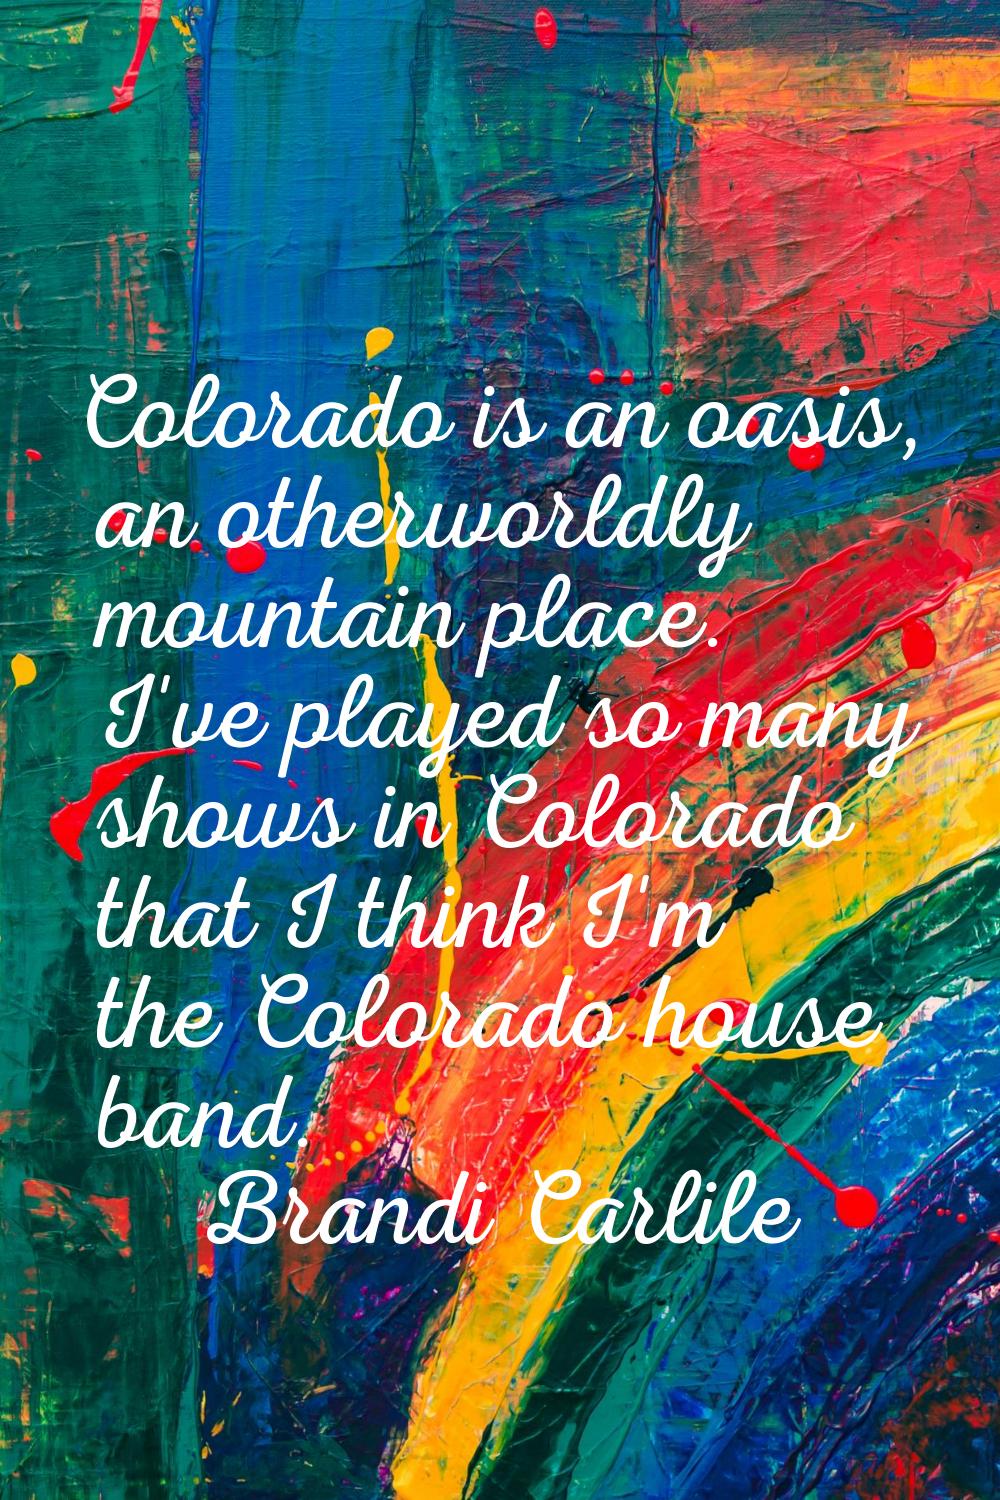 Colorado is an oasis, an otherworldly mountain place. I've played so many shows in Colorado that I 